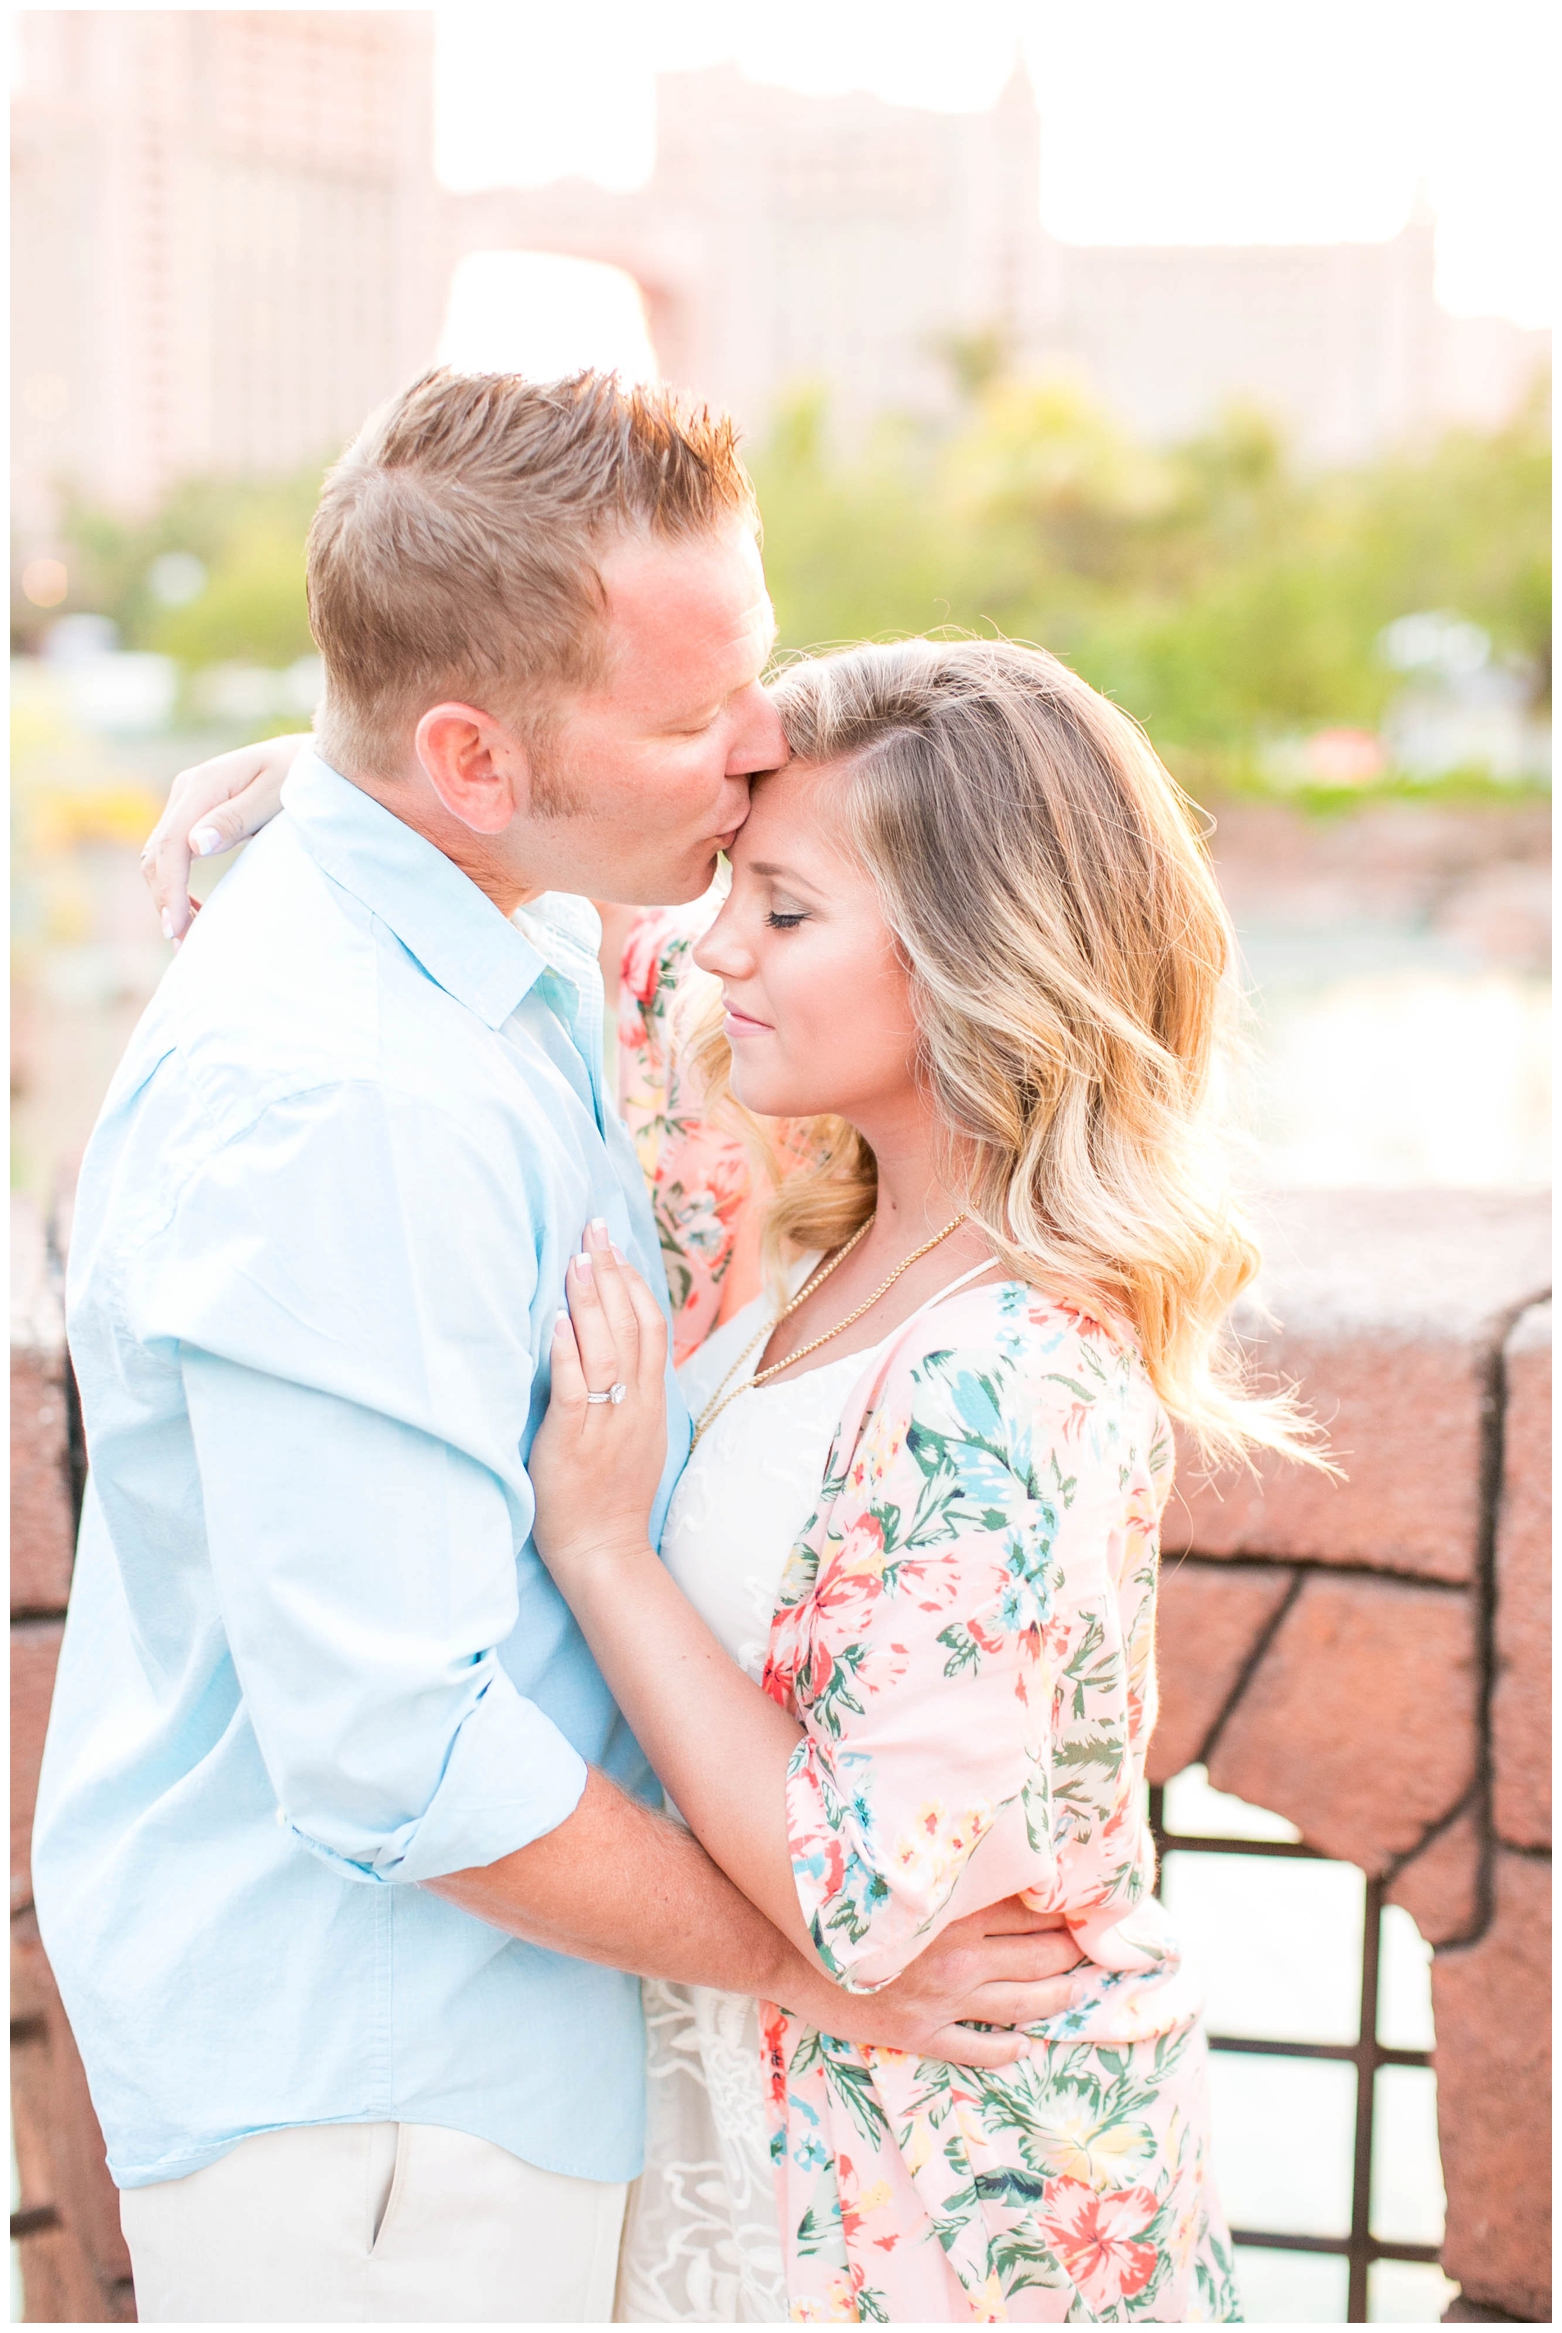 View More: http://hopetaylorphotographyphotos.pass.us/chelsey-and-marc-sweetheart-session